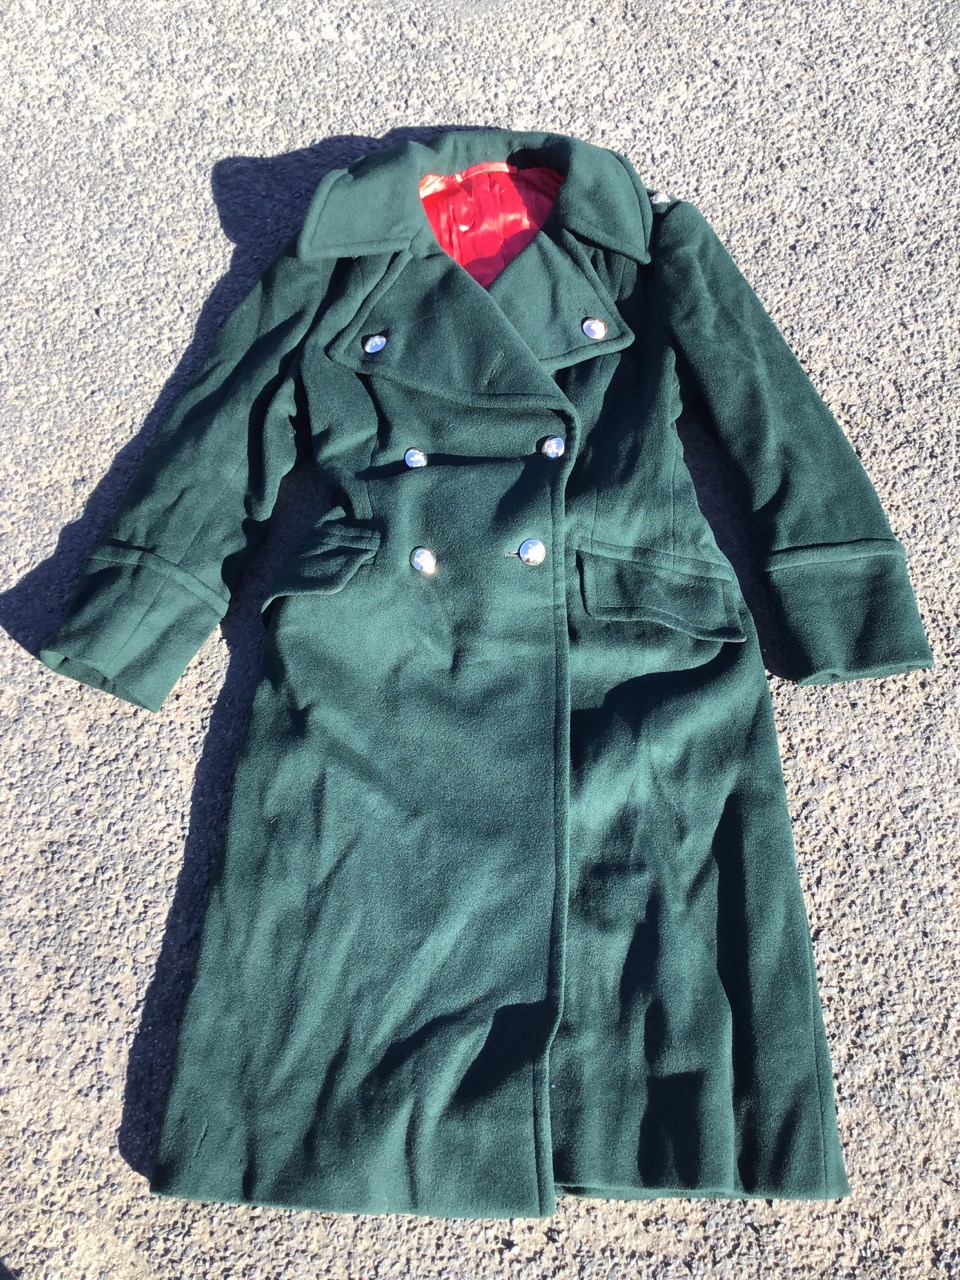 A Royal Navy Volunteer Reserve engineers uniform with jacket having bullion lacings and brass - Image 2 of 3